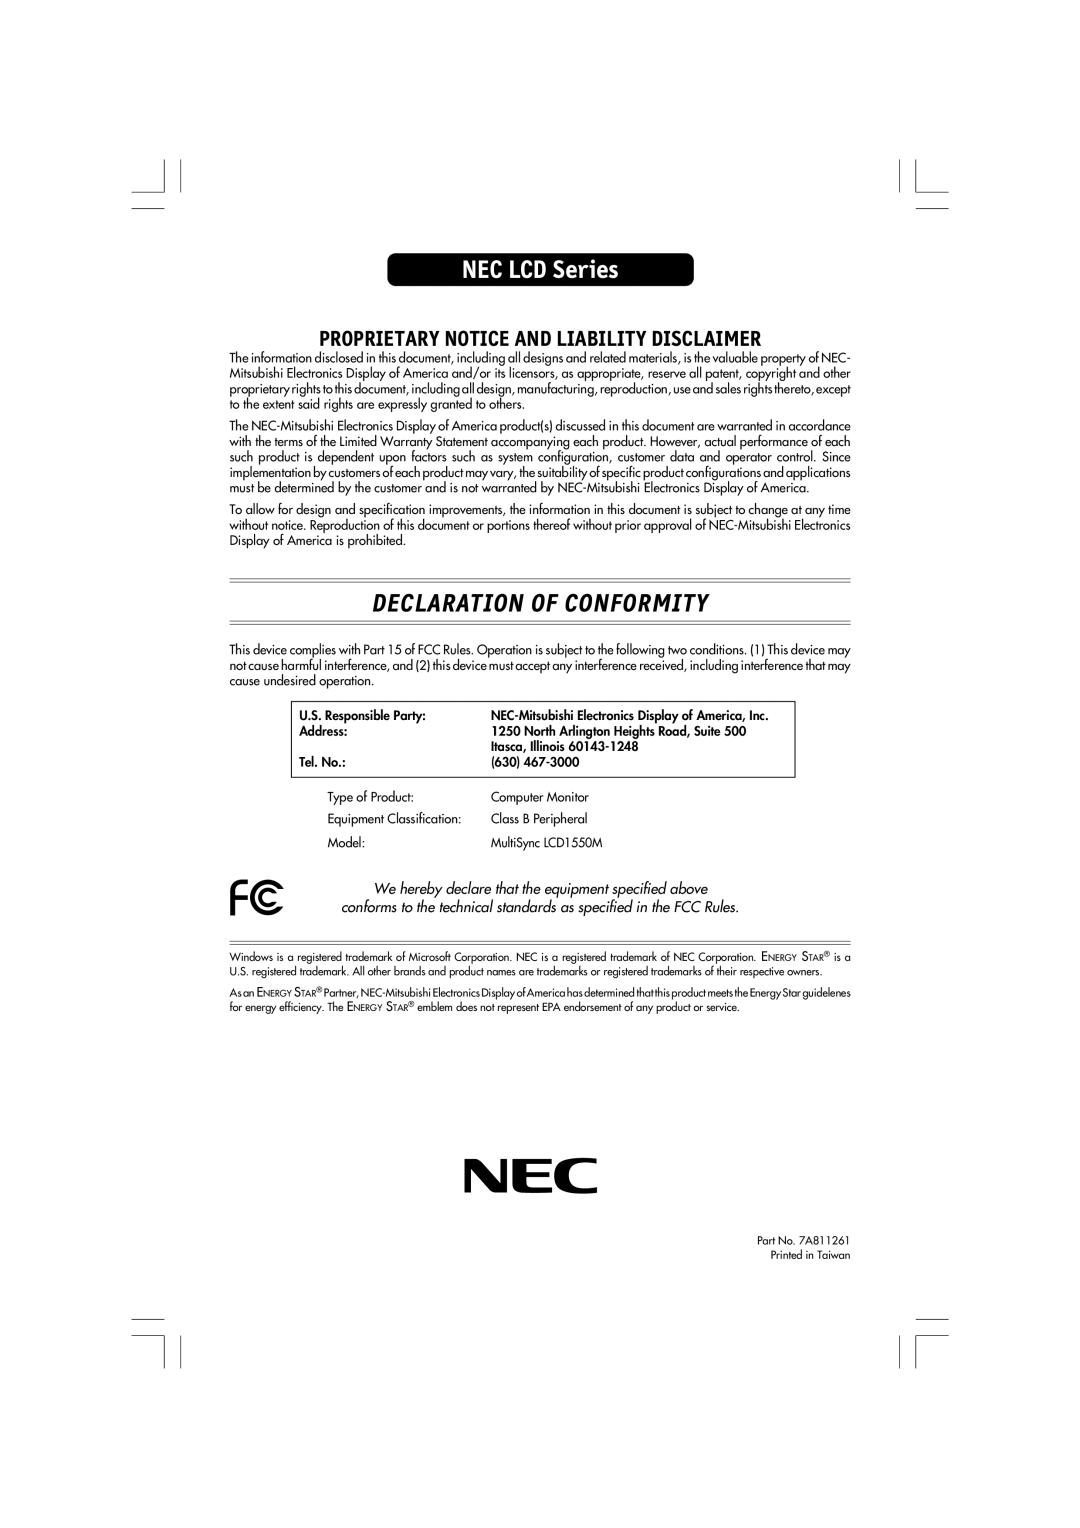 NEC LCD1550M, LA-15R03-BK manual Declaration Of Conformity, NEC LCD Series, Proprietary Notice And Liability Disclaimer 